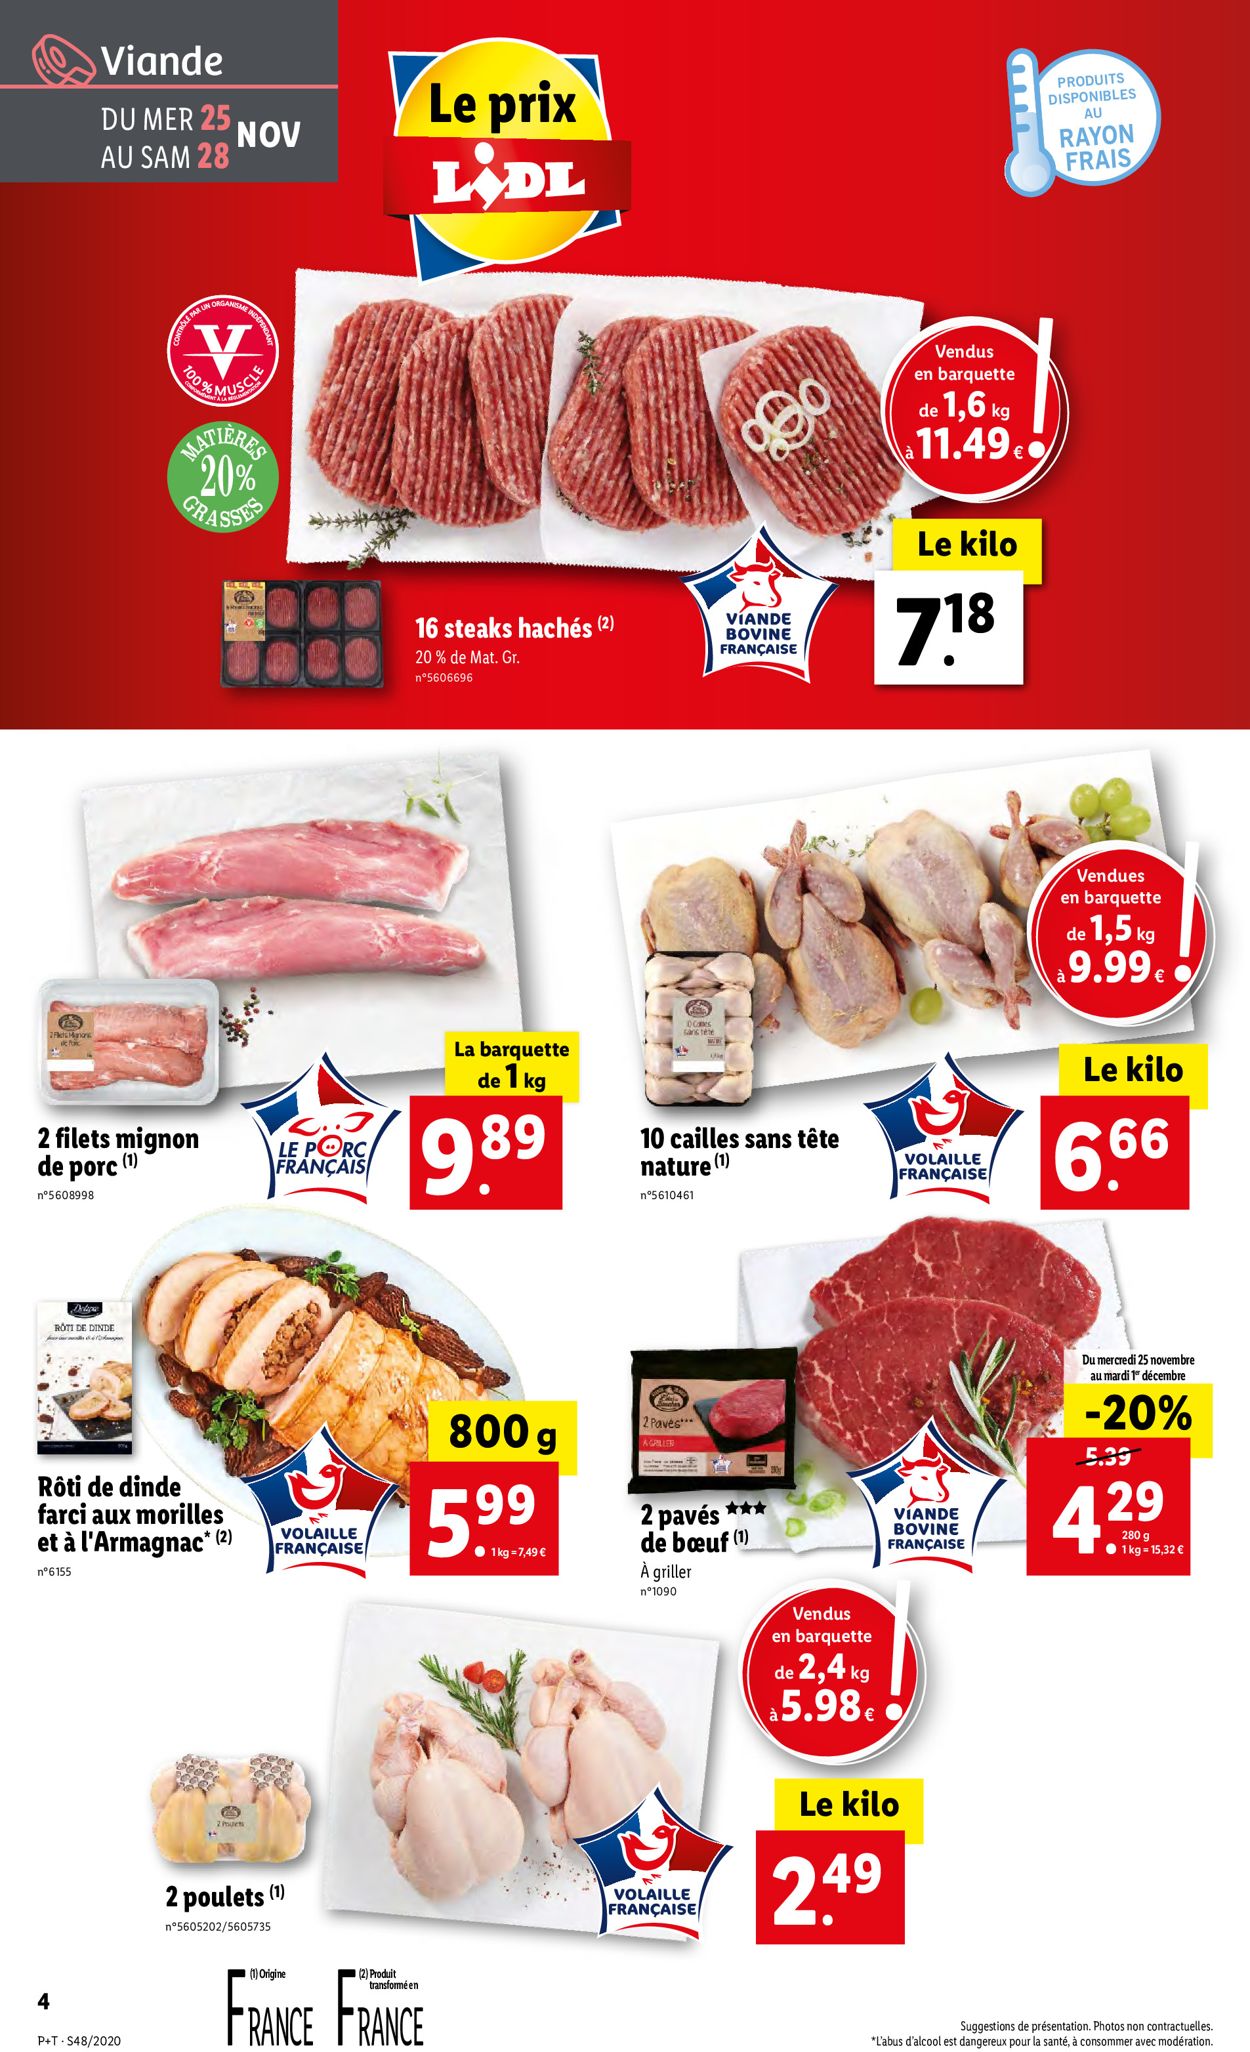 Lidl Catalogue - 25.11-01.12.2020 (Page 4)